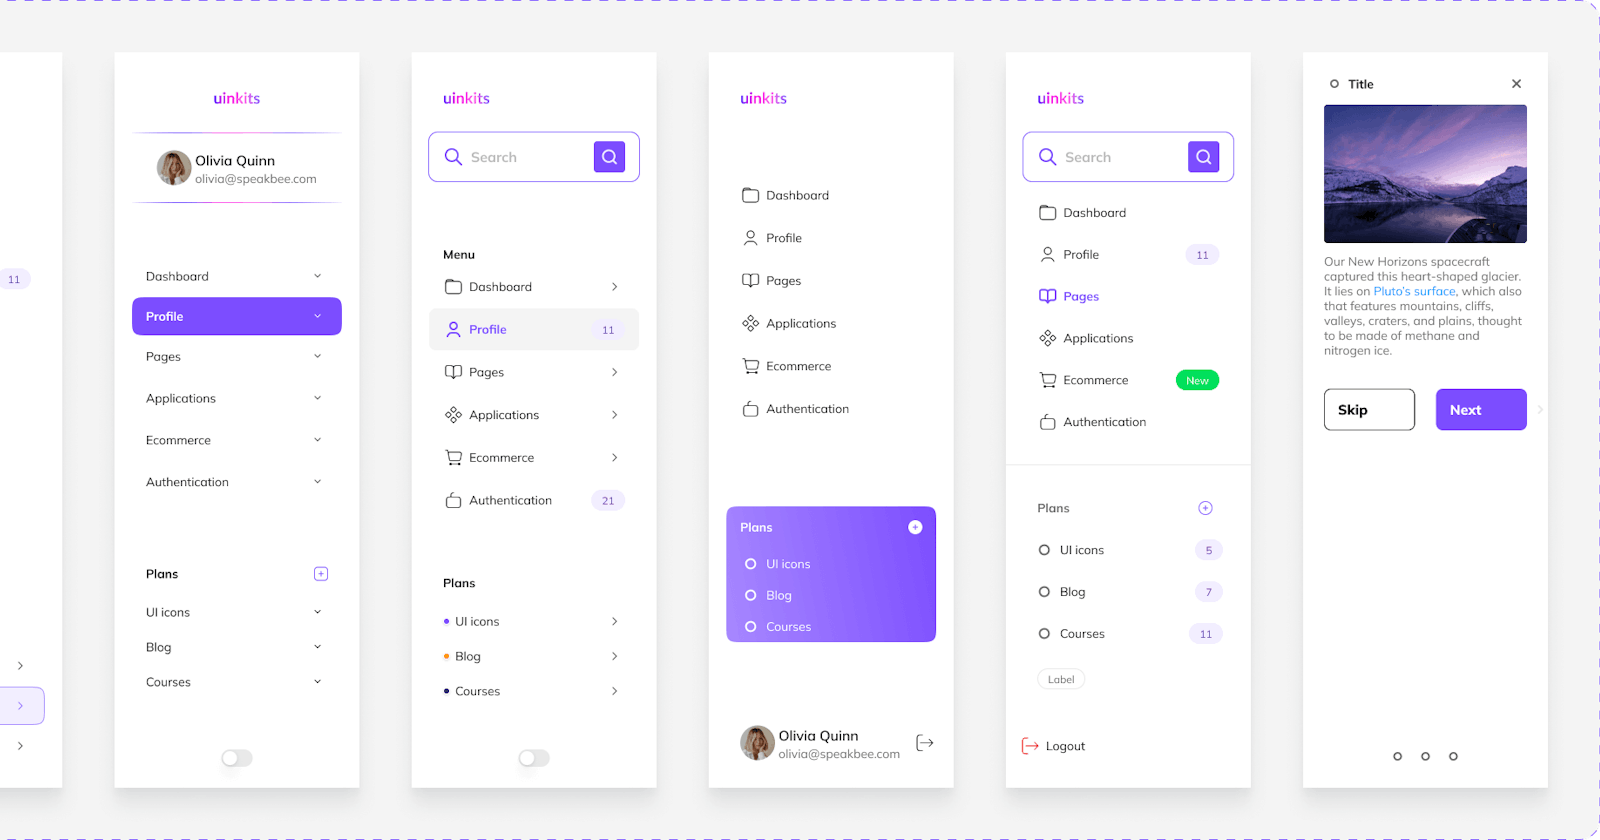 How to use UI UX Drawers?